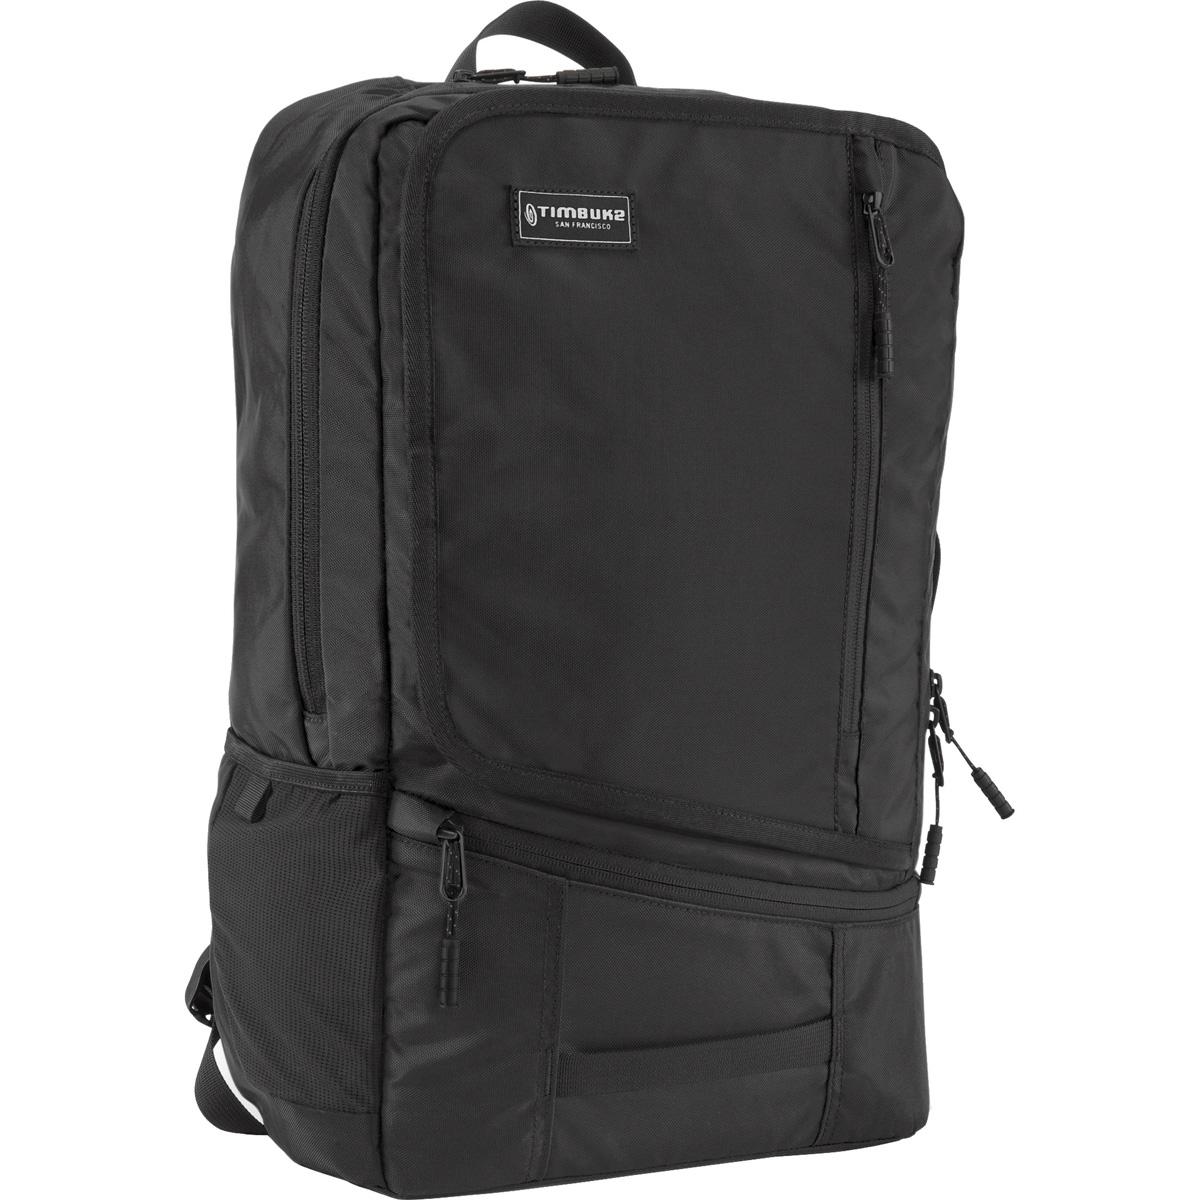 Timbuk2 Q Laptop Backpack for $38.73